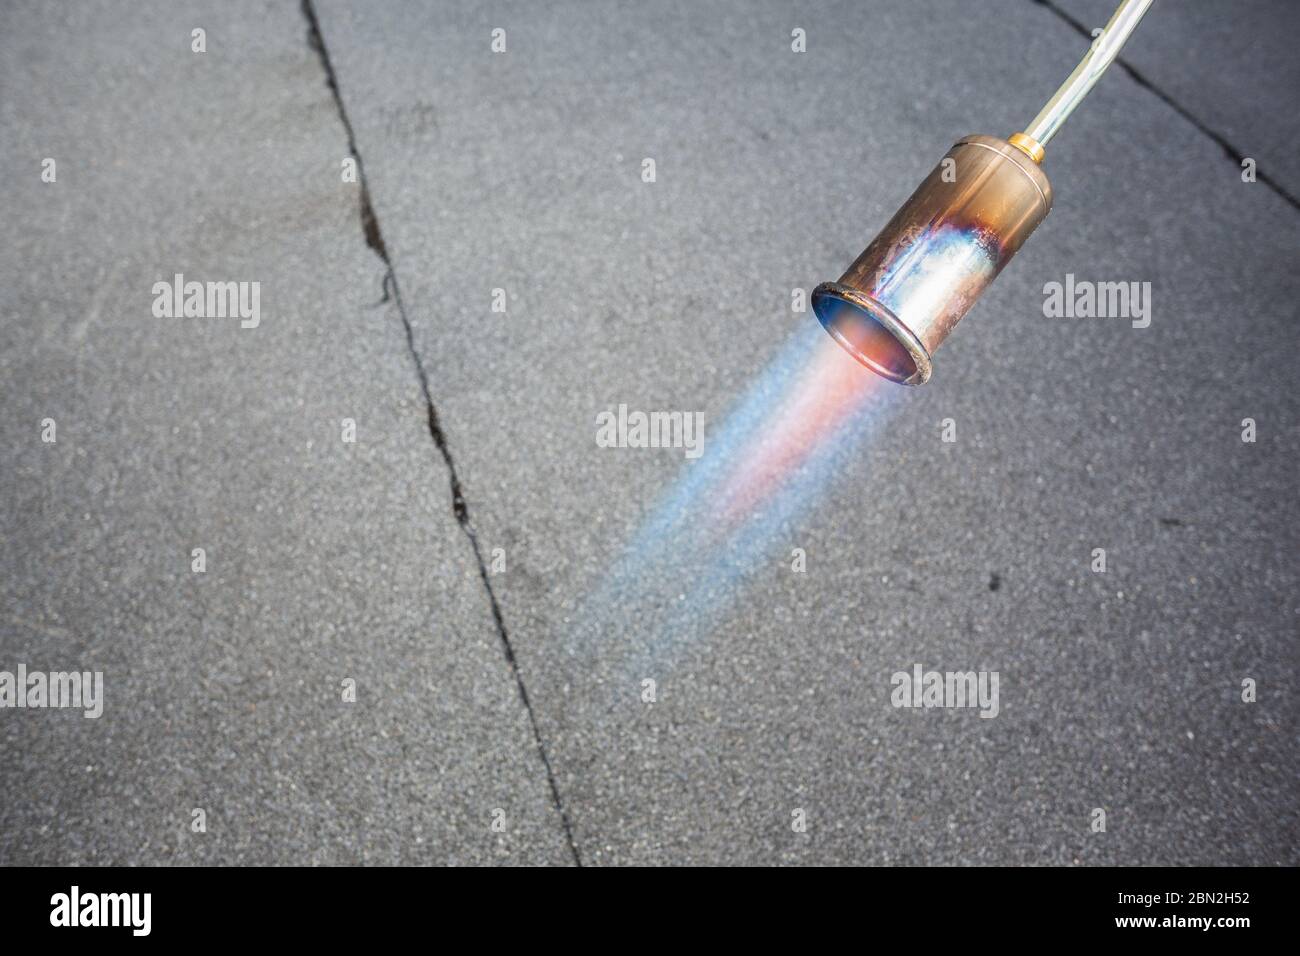 Burning nozzle of a large gas torch Stock Photo